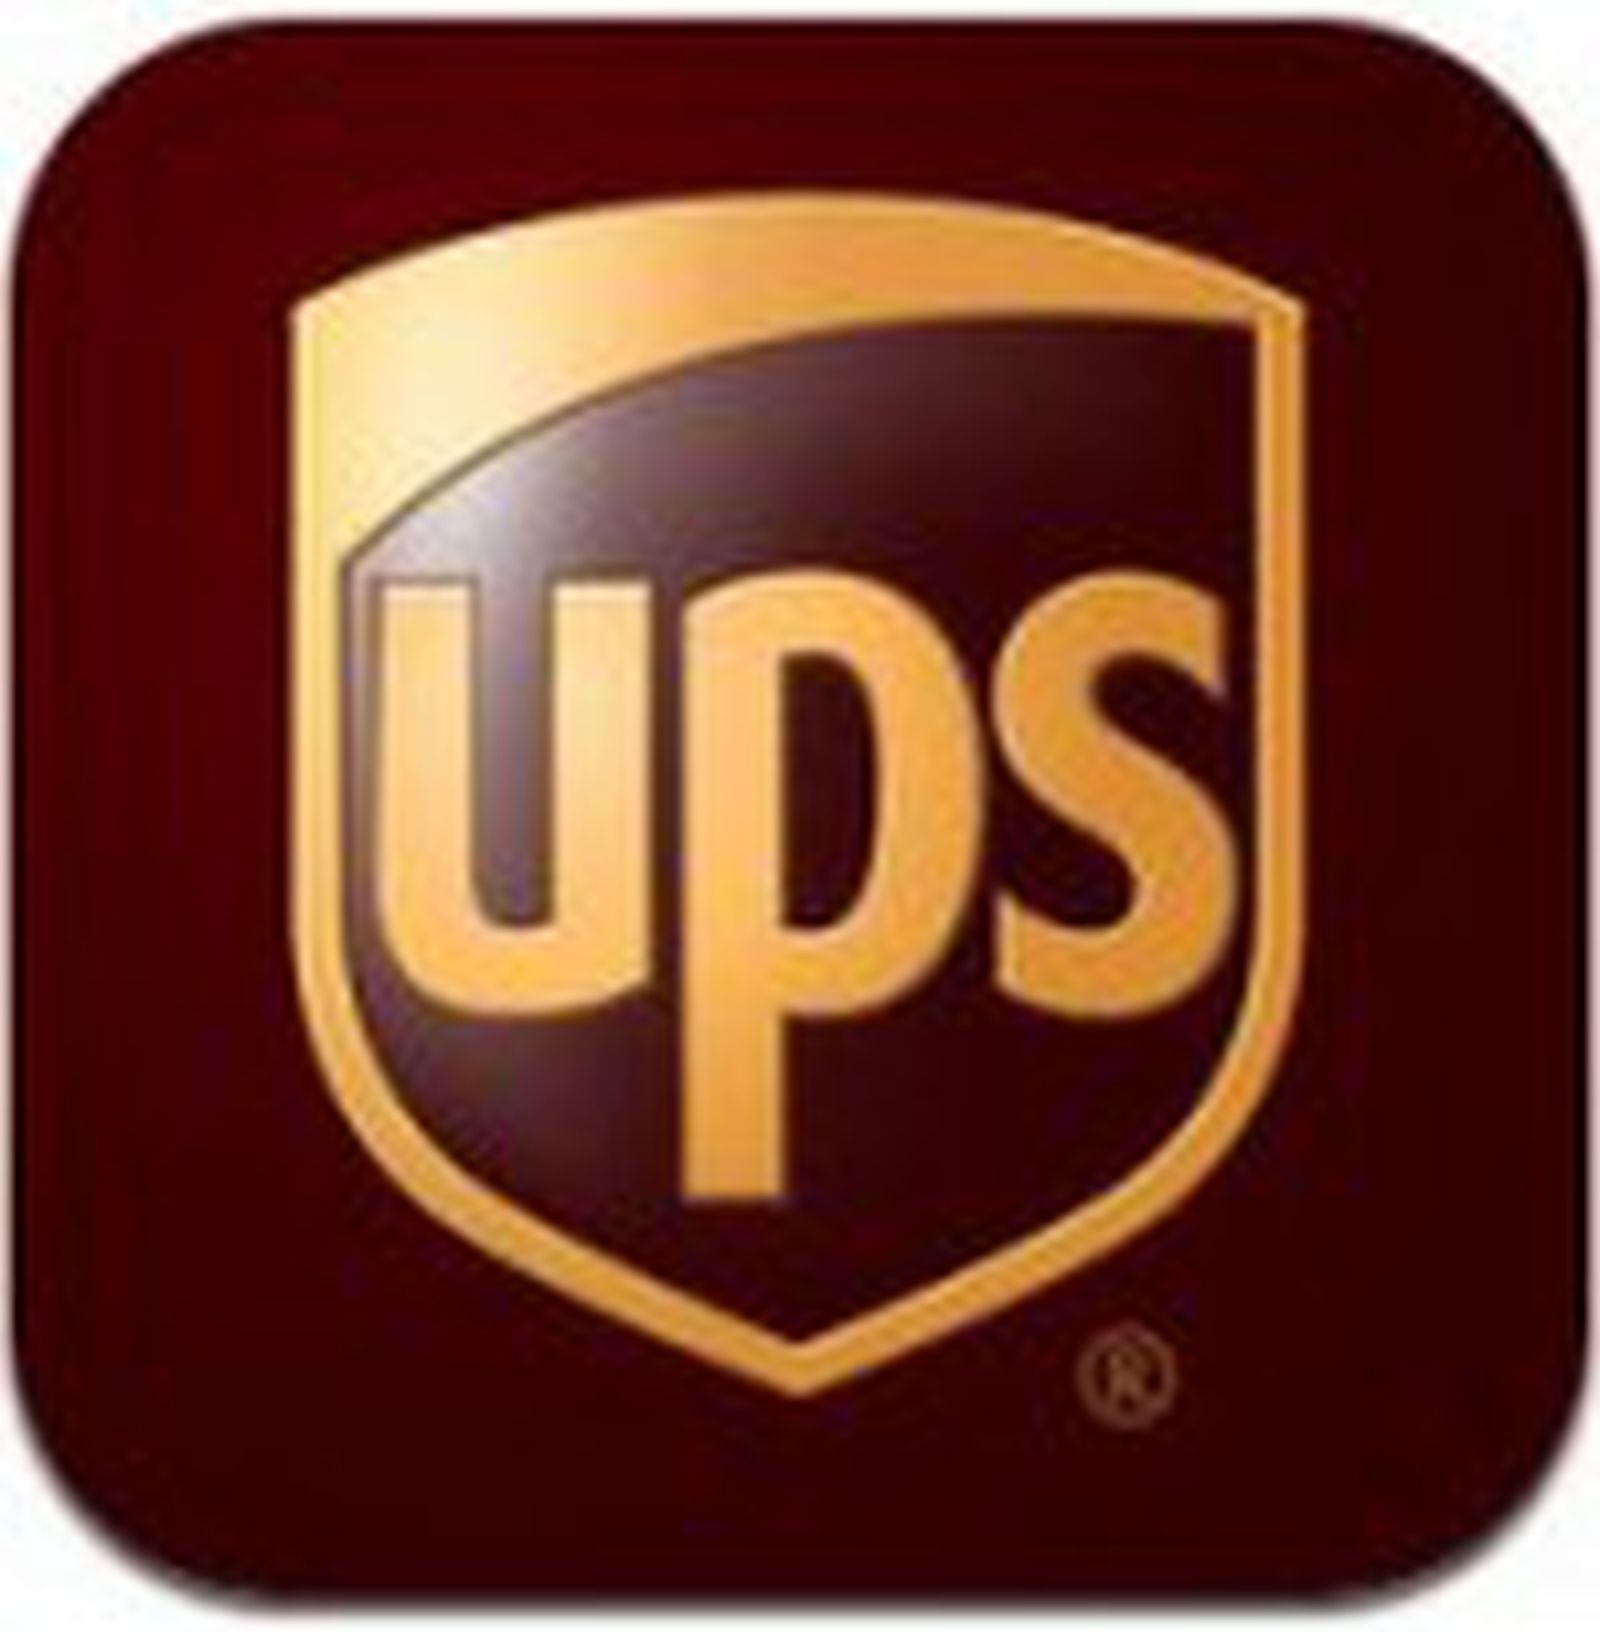 UPS Mobile App Adds Barcode Scanning For Easier Package Tracking